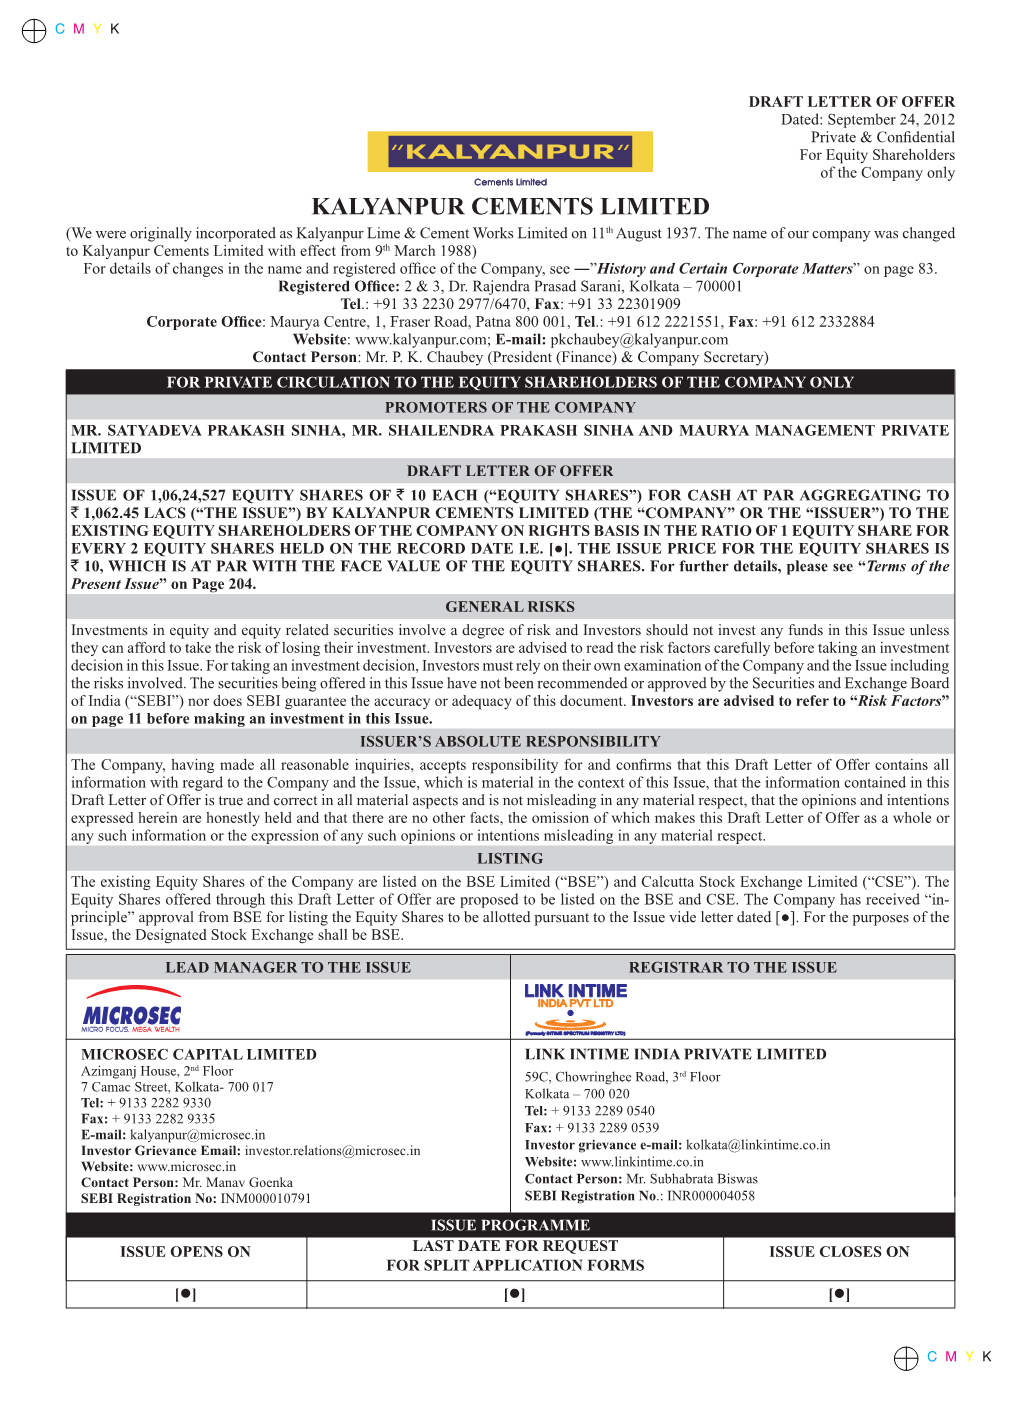 KALYANPUR CEMENTS LIMITED (We Were Originally Incorporated As Kalyanpur Lime & Cement Works Limited on 11Th August 1937